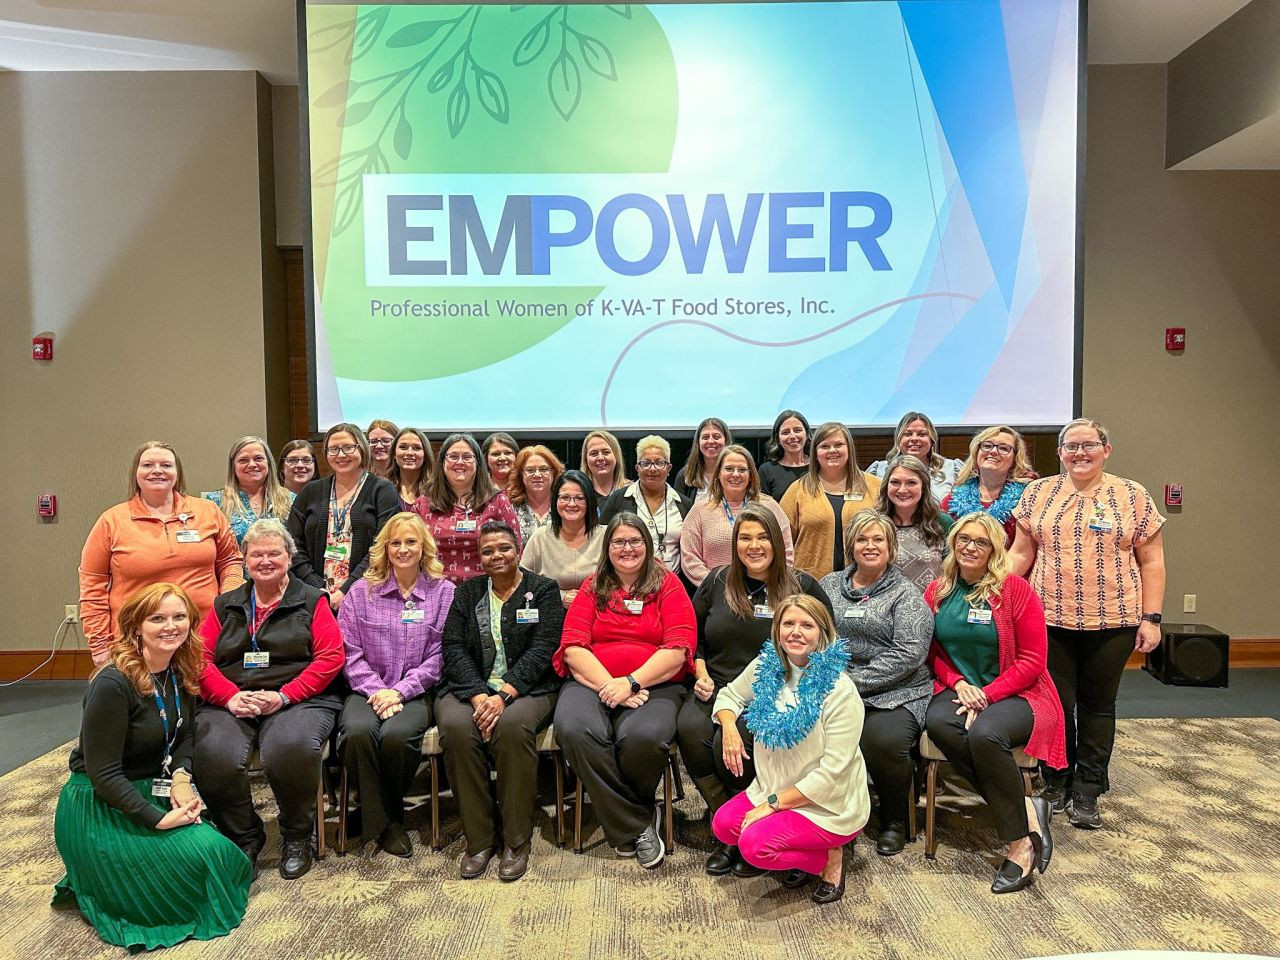 Food City’s Empower program enhances the professional skills and potential of women in business and retail.